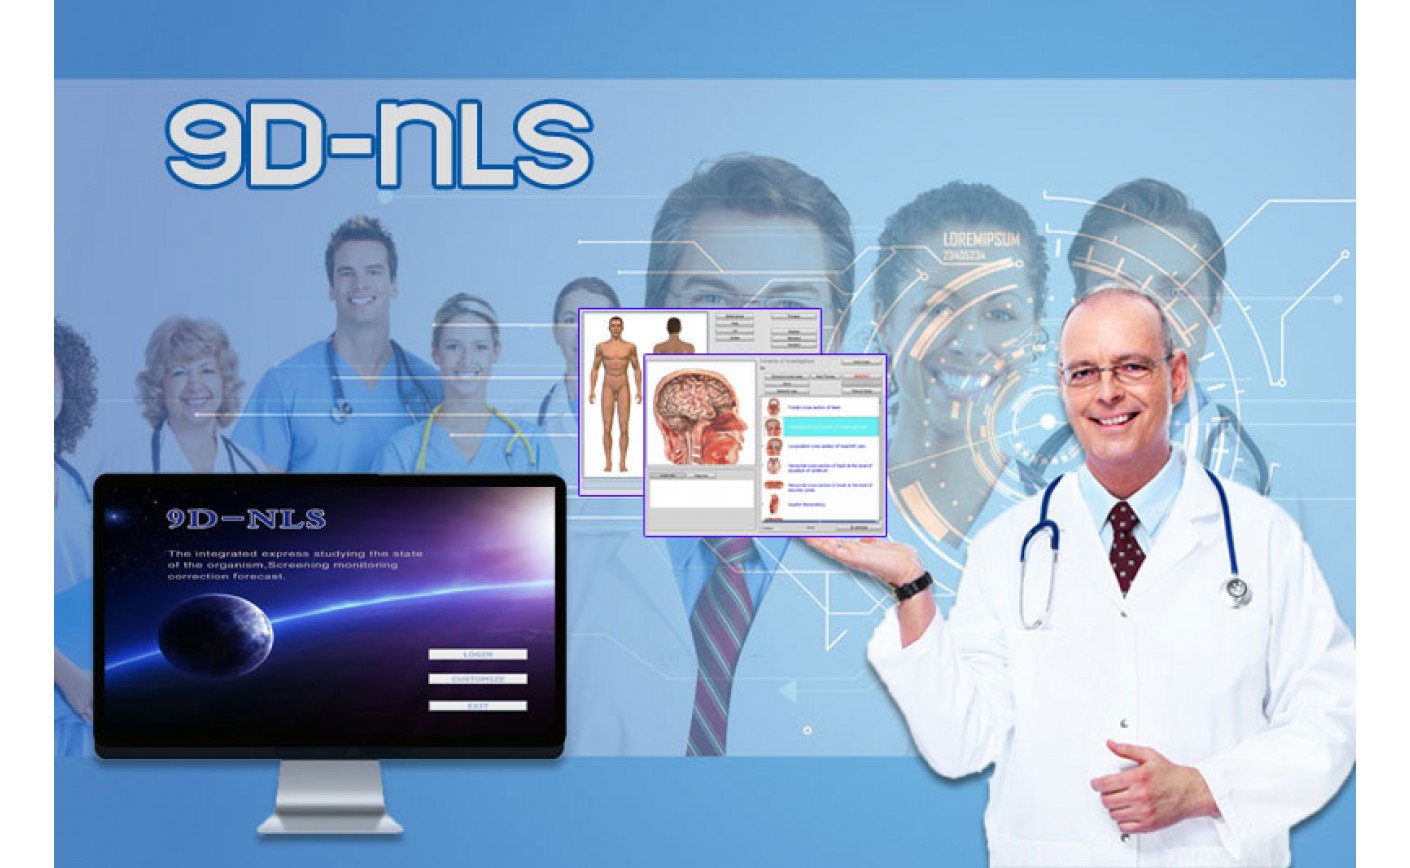 The Application Of 9D-NLS Health analyzer